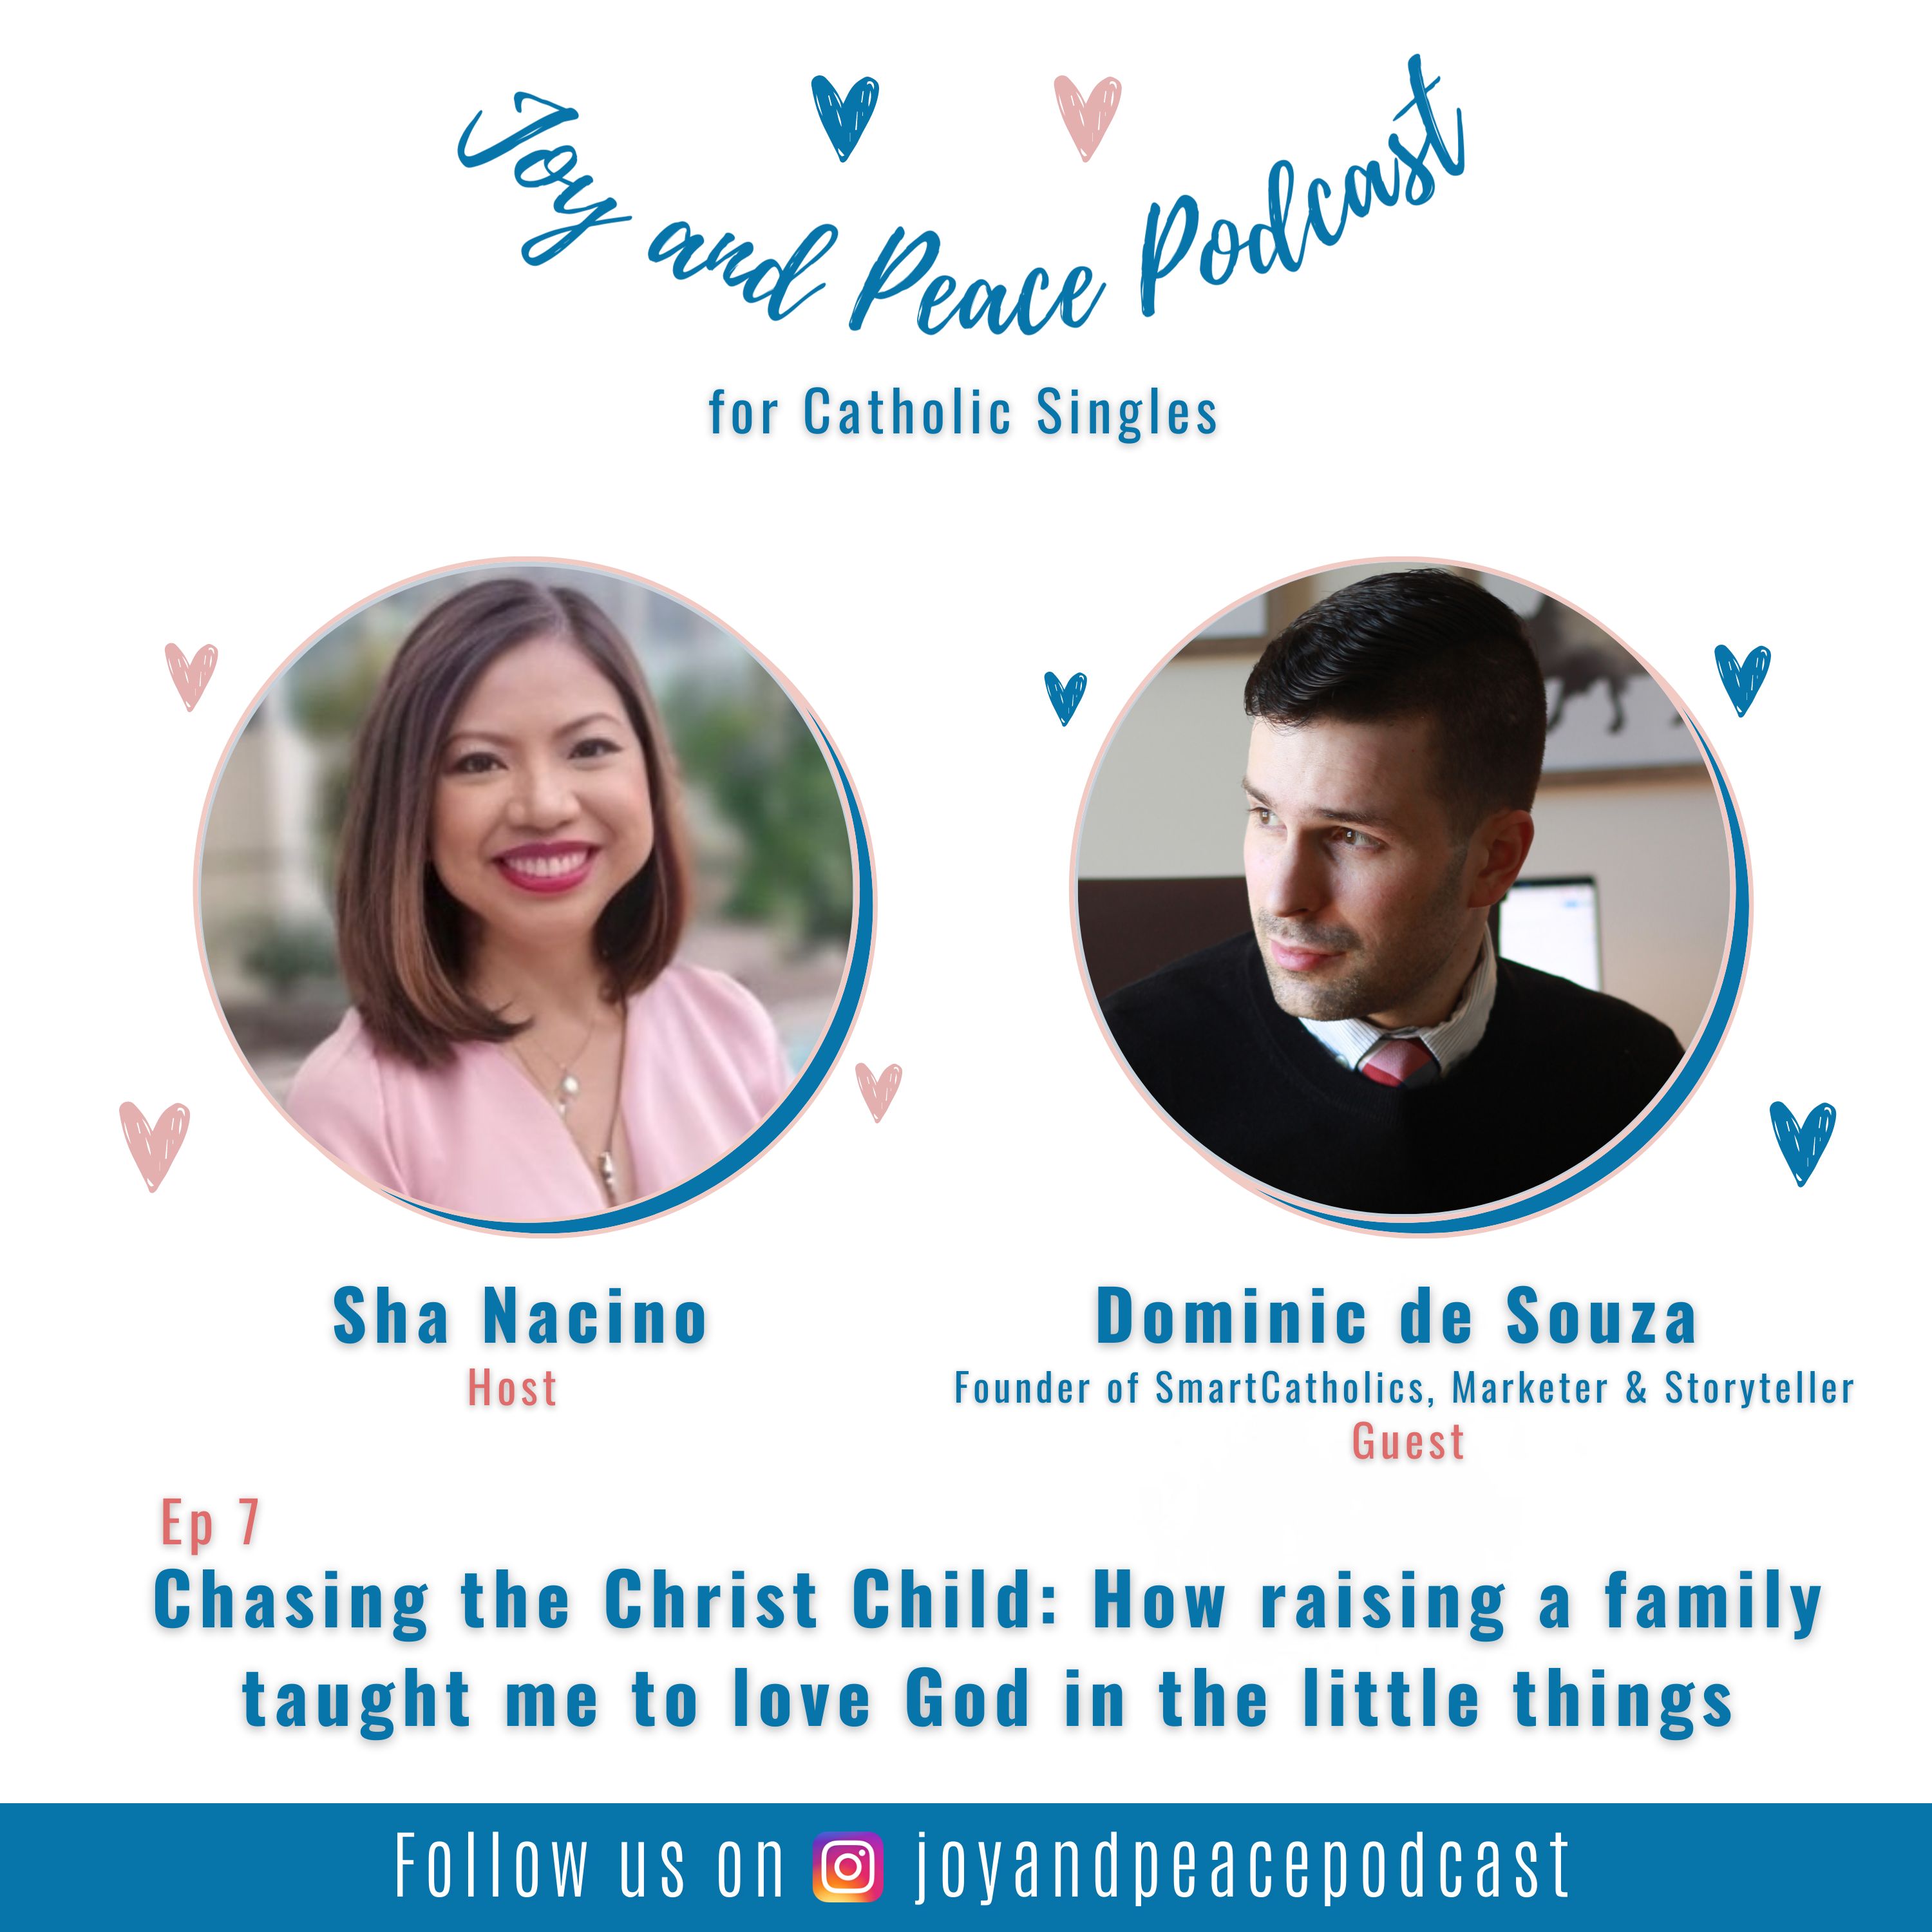 Chasing the Christ Child: How Raising a family taught me to love God in the little things